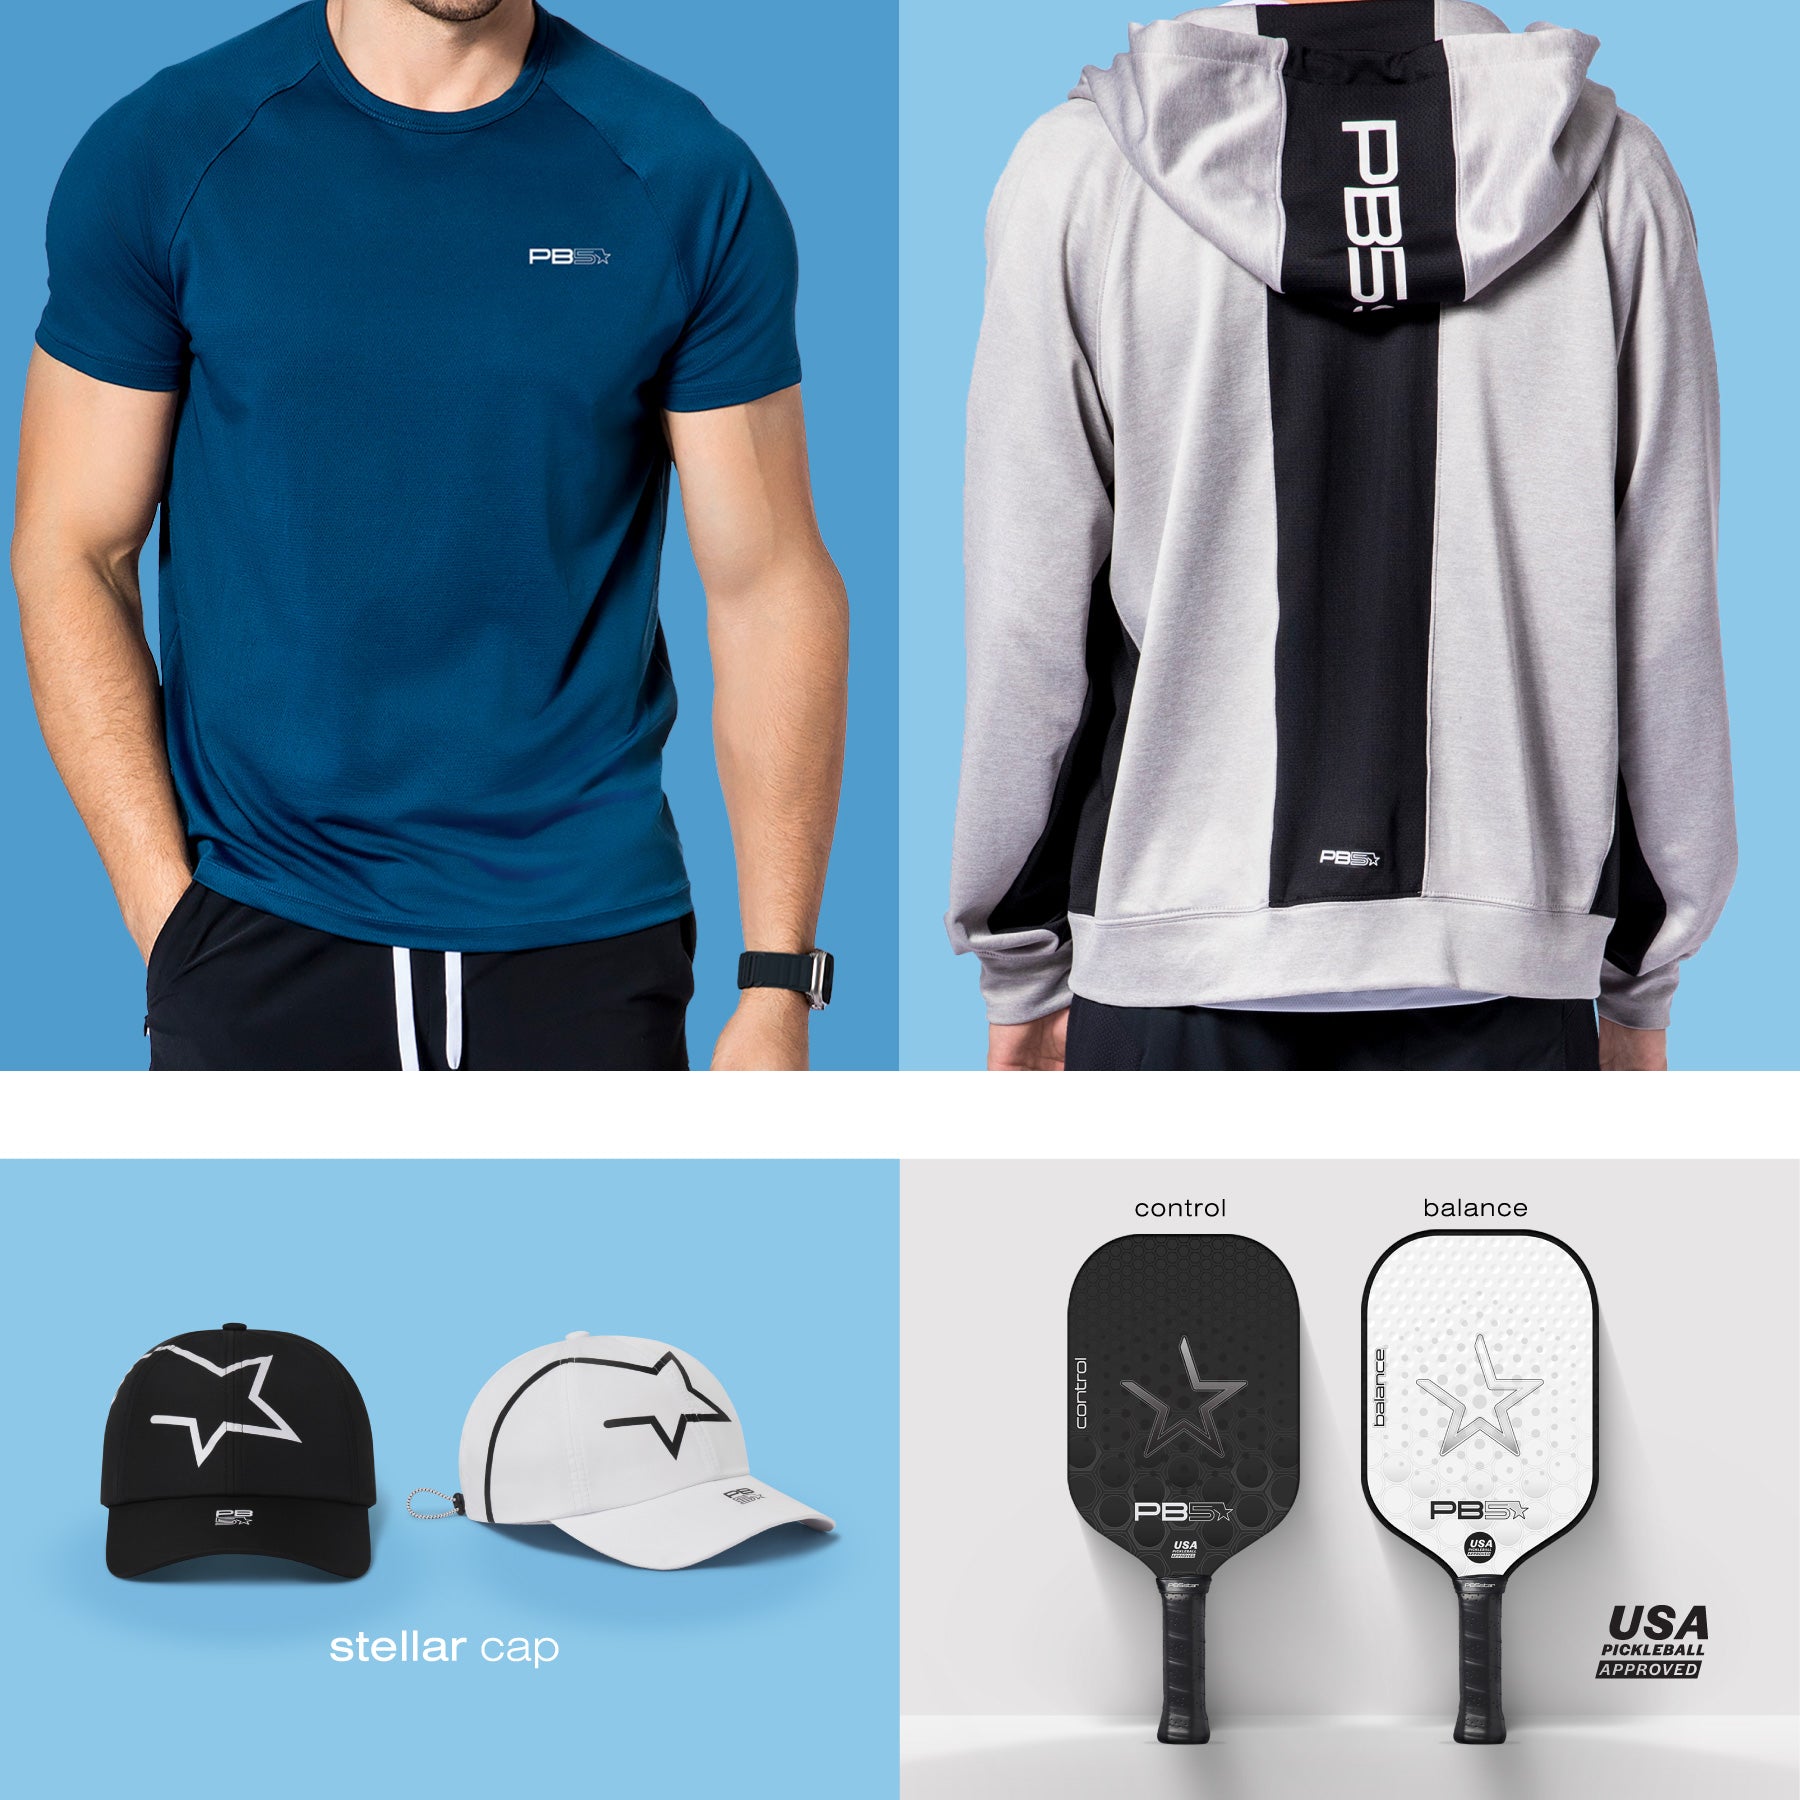 Four images featuring men's Core Performance Tee in astral blue, mens' Performance Full Zip Hoodie, Stellar Cap, and USA Pickleball approved paddles.